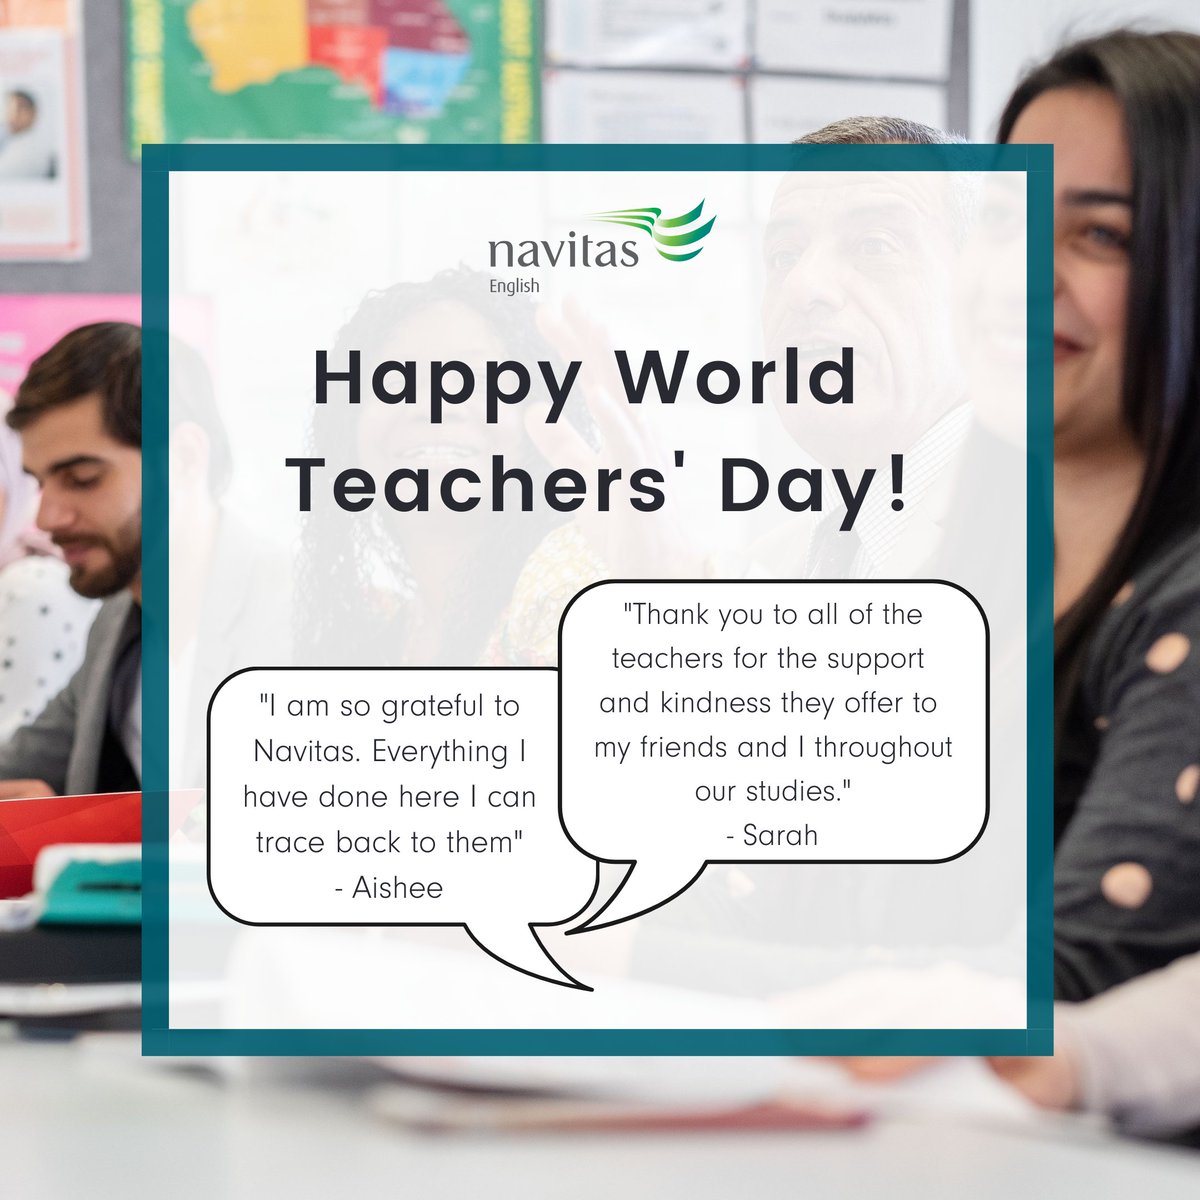 Happy World Teachers Day to all of our amazing teachers and educators! 
 
Our teachers go above and beyond to support their students. Thank you 🙌 
 
#WorldTeachersDay #TeachersDay #ThankTeachers